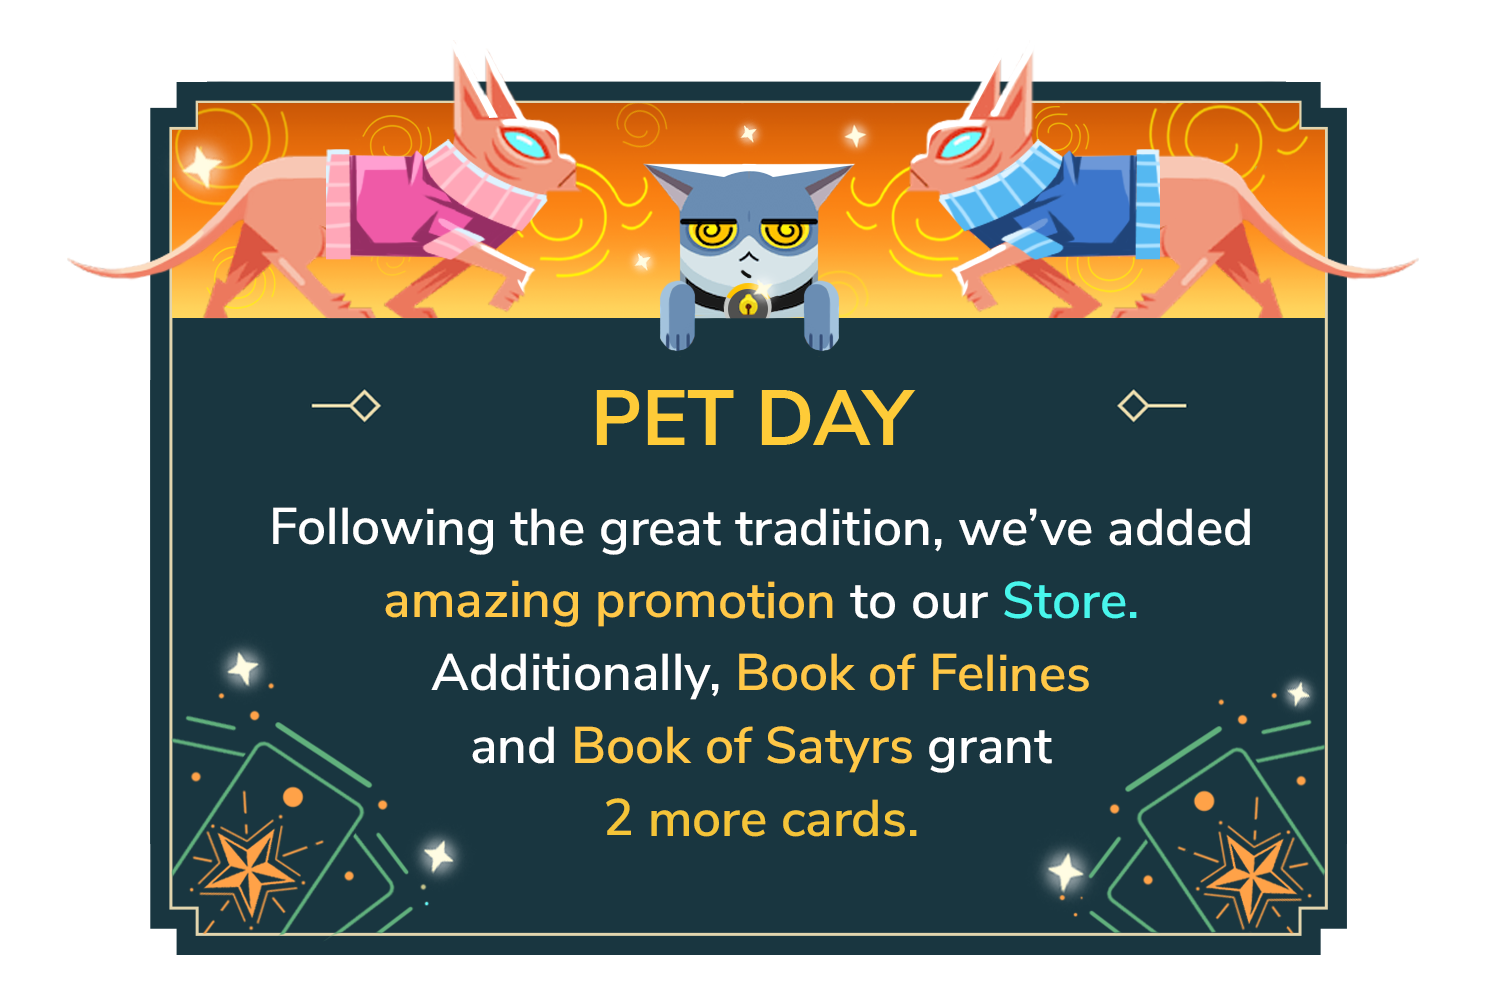 Pet Day in-game pop-up.